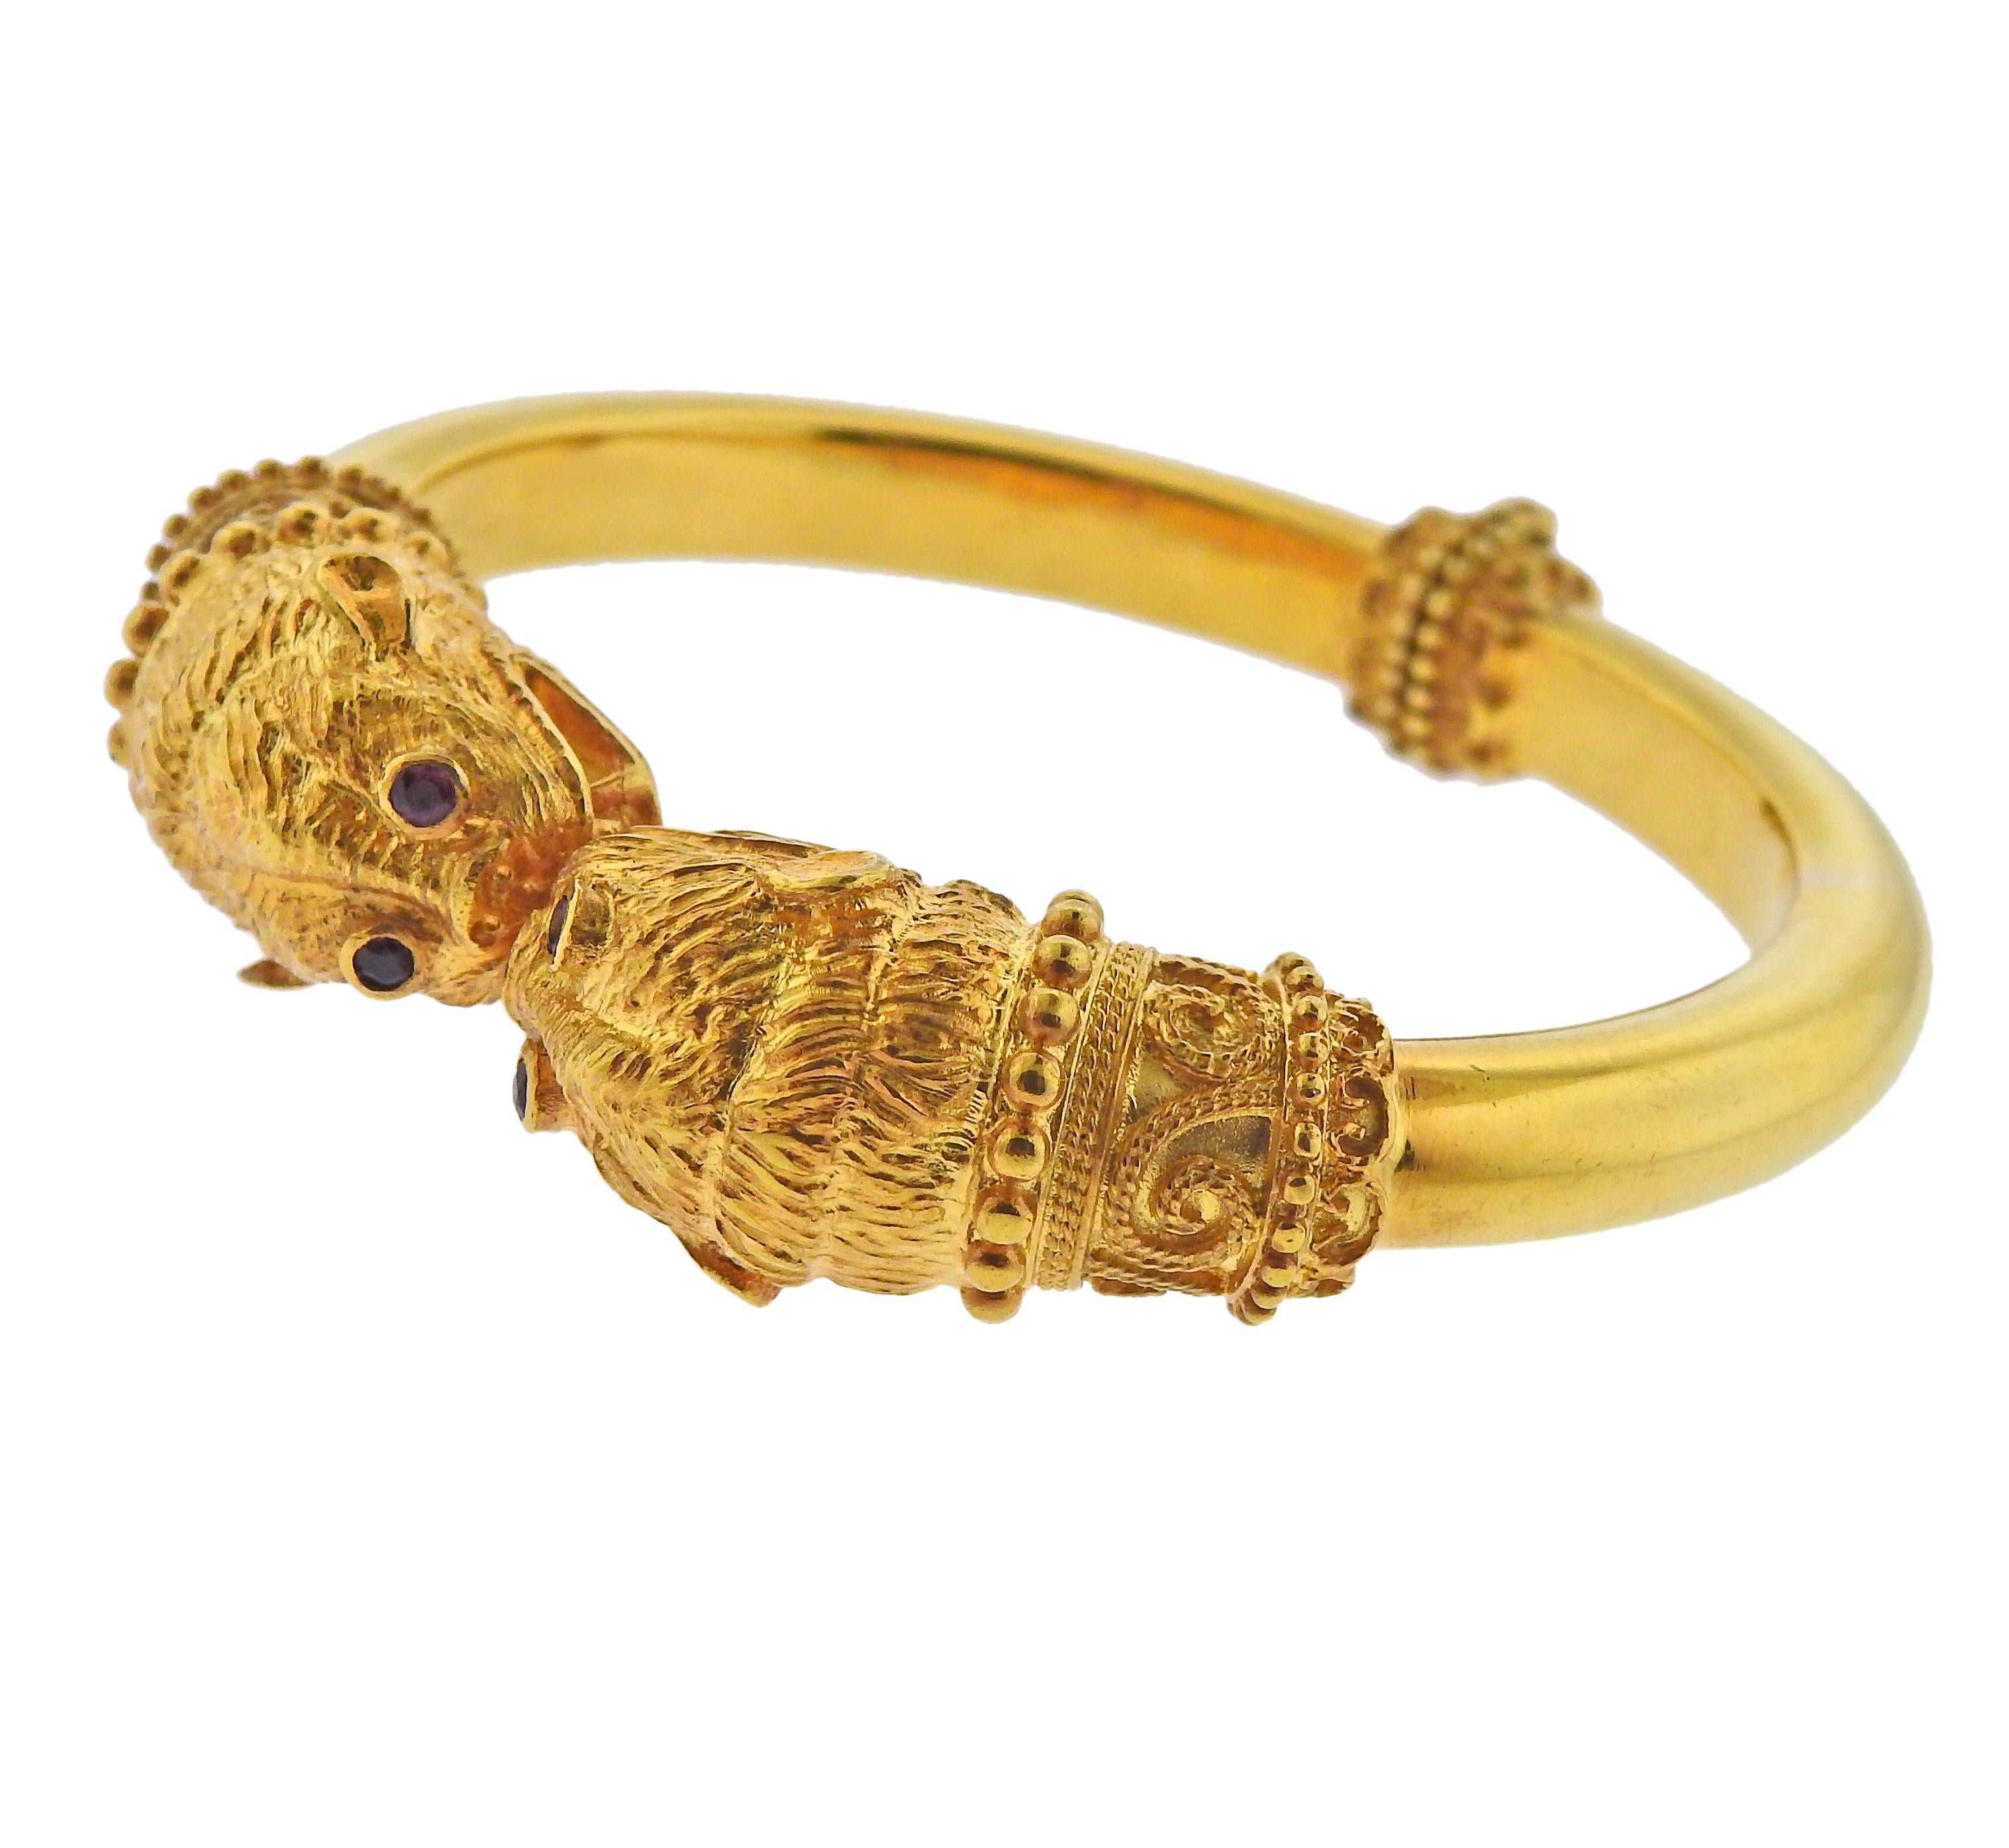 Iconic Chimera bracelet in 18k yellow gold by Ilias Lalaounis with ruby eyes. Bracelet will fit approx. 7